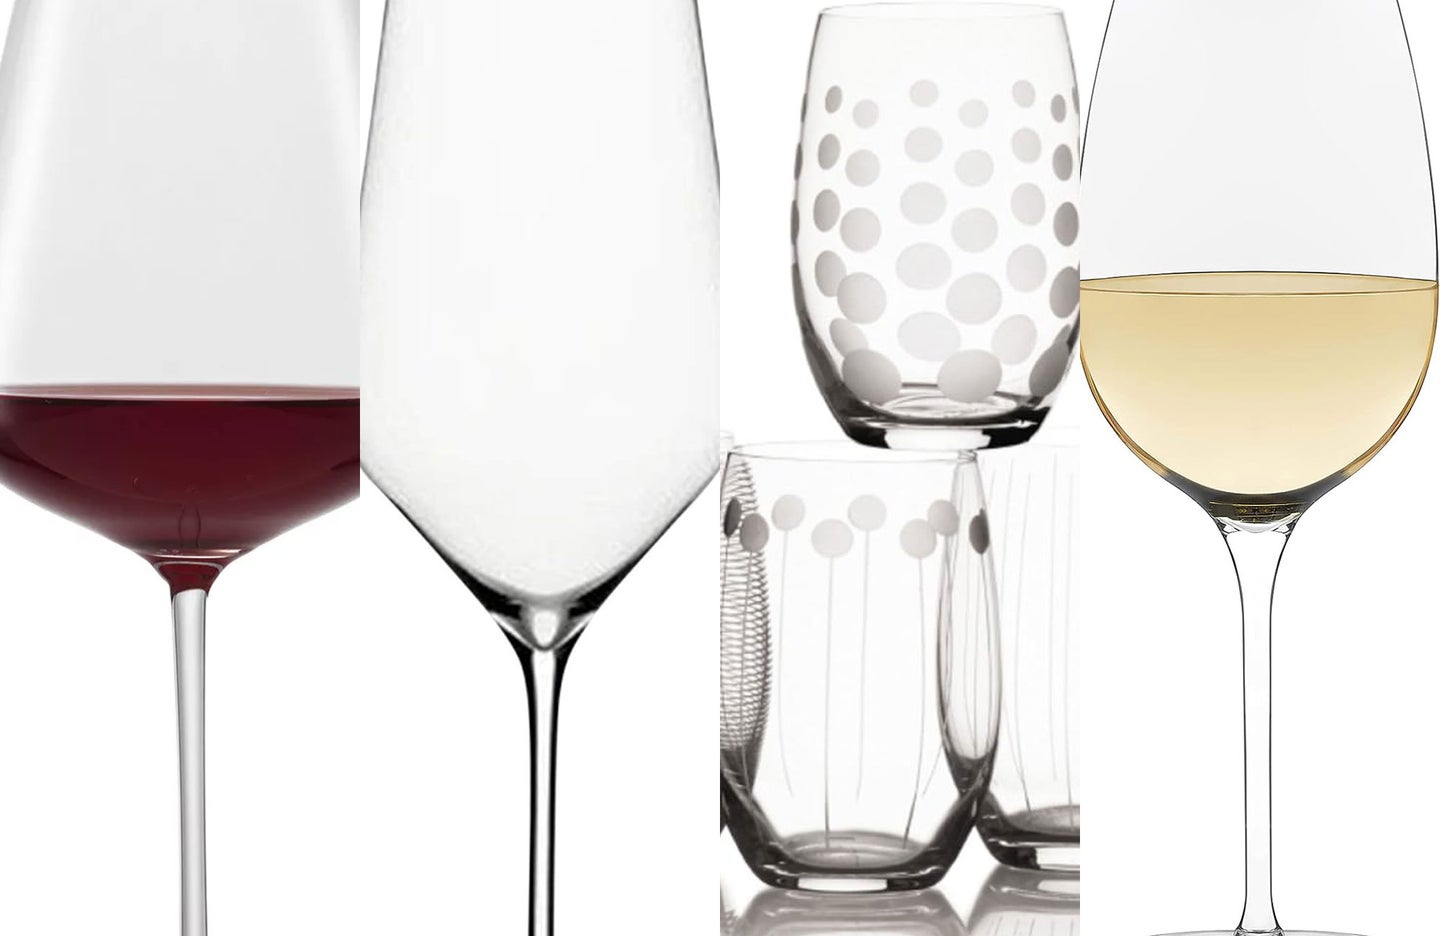 A lineup of the best wine glasses on a plain backgorund